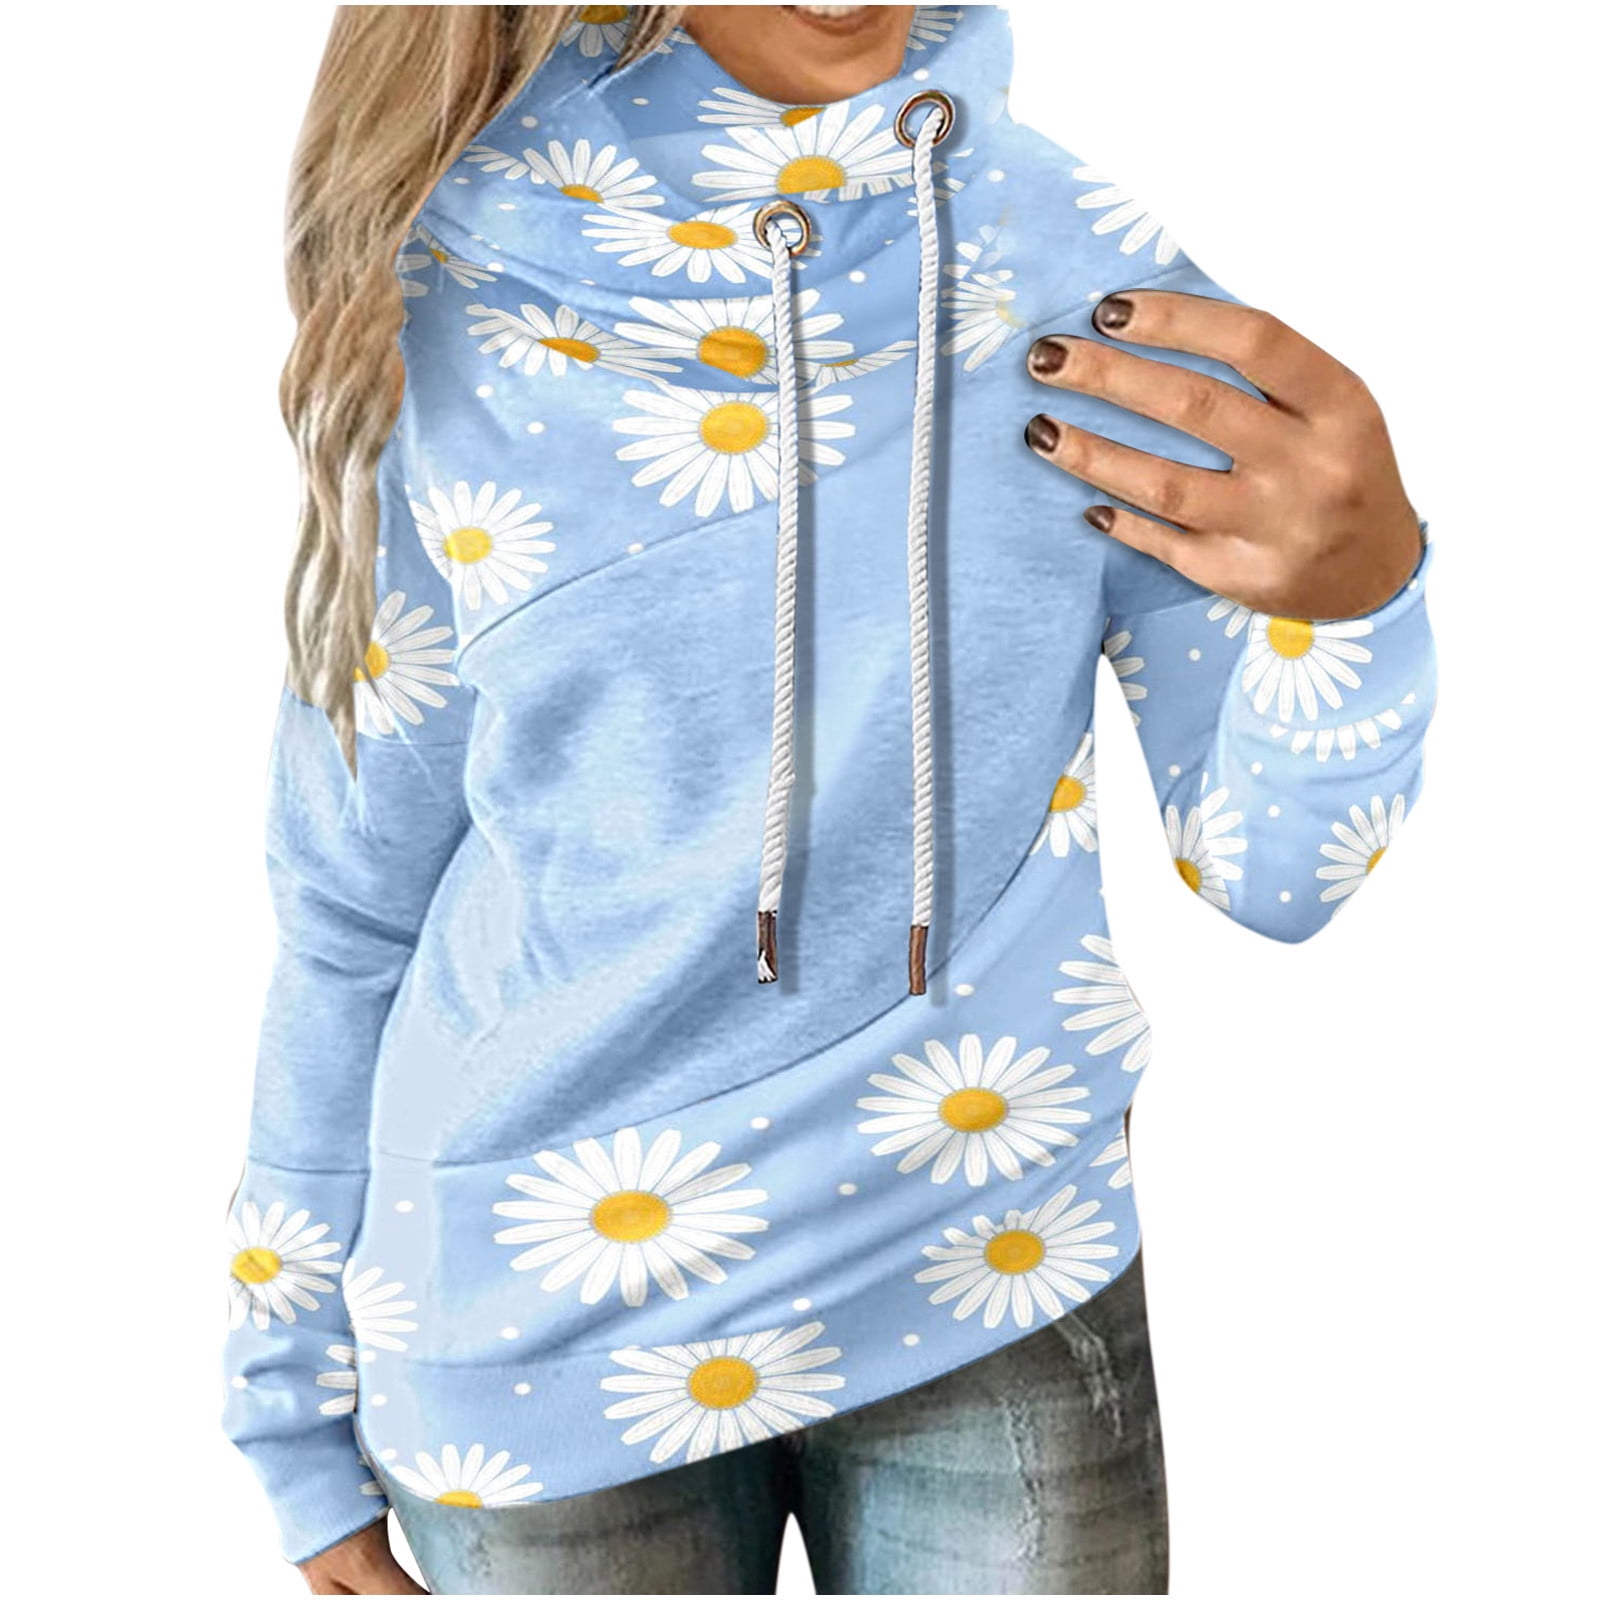 Clothing Womens Clothing Hoodies & Sweatshirts Hoodies Pointed Hoody with patchwork of recycled wool blue and white eye patch! 